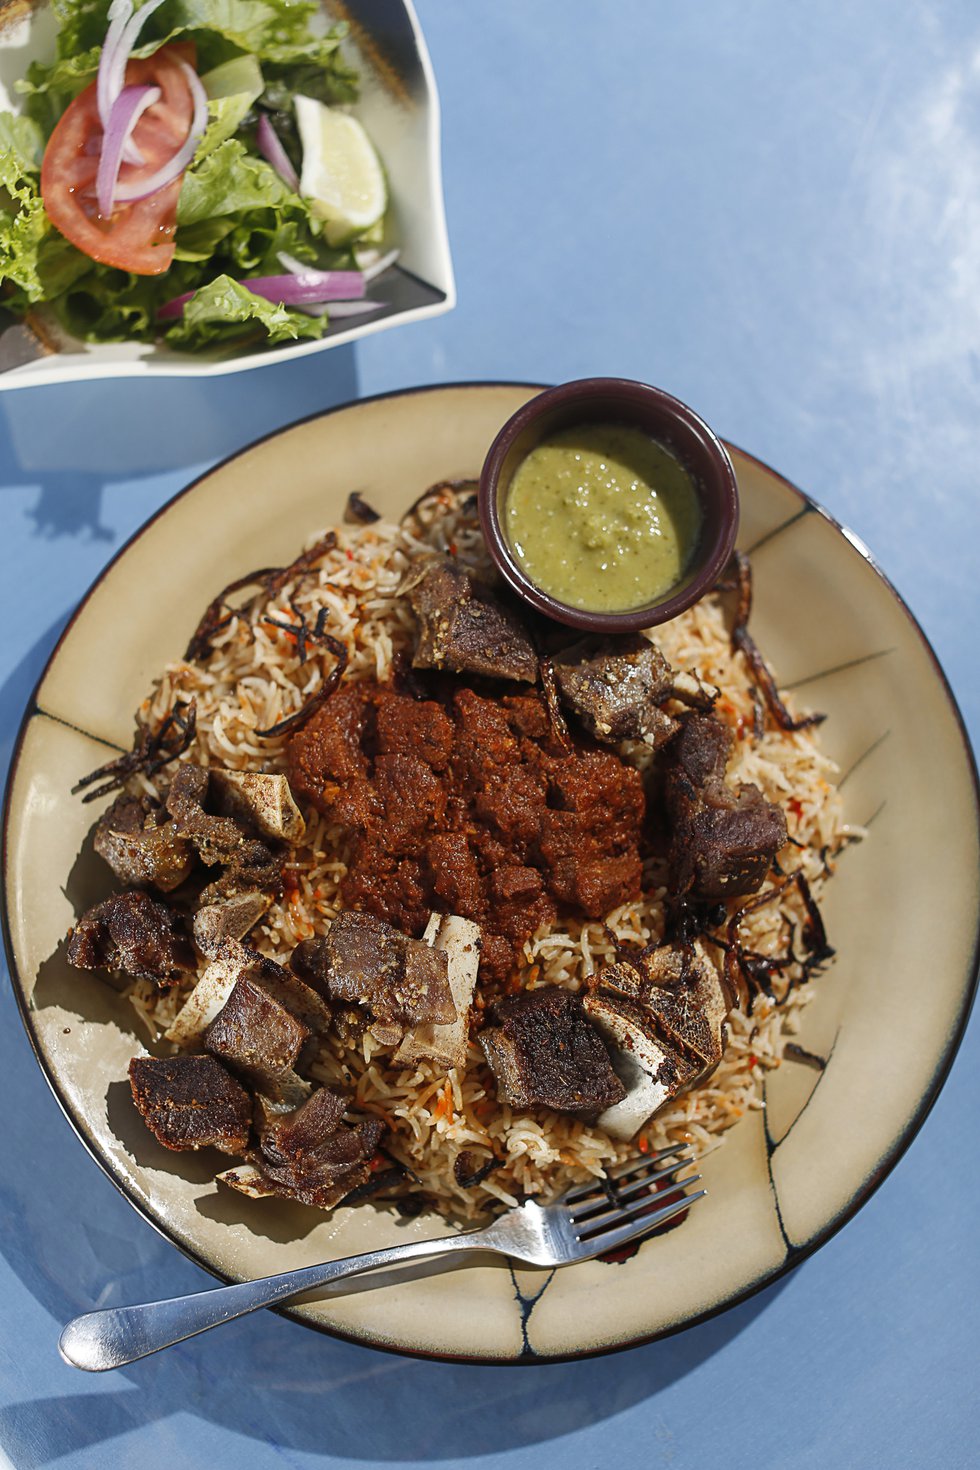 Derae Restaurant: Crispy hanid, or goat meat on rice, is for adventuresome eaters. 